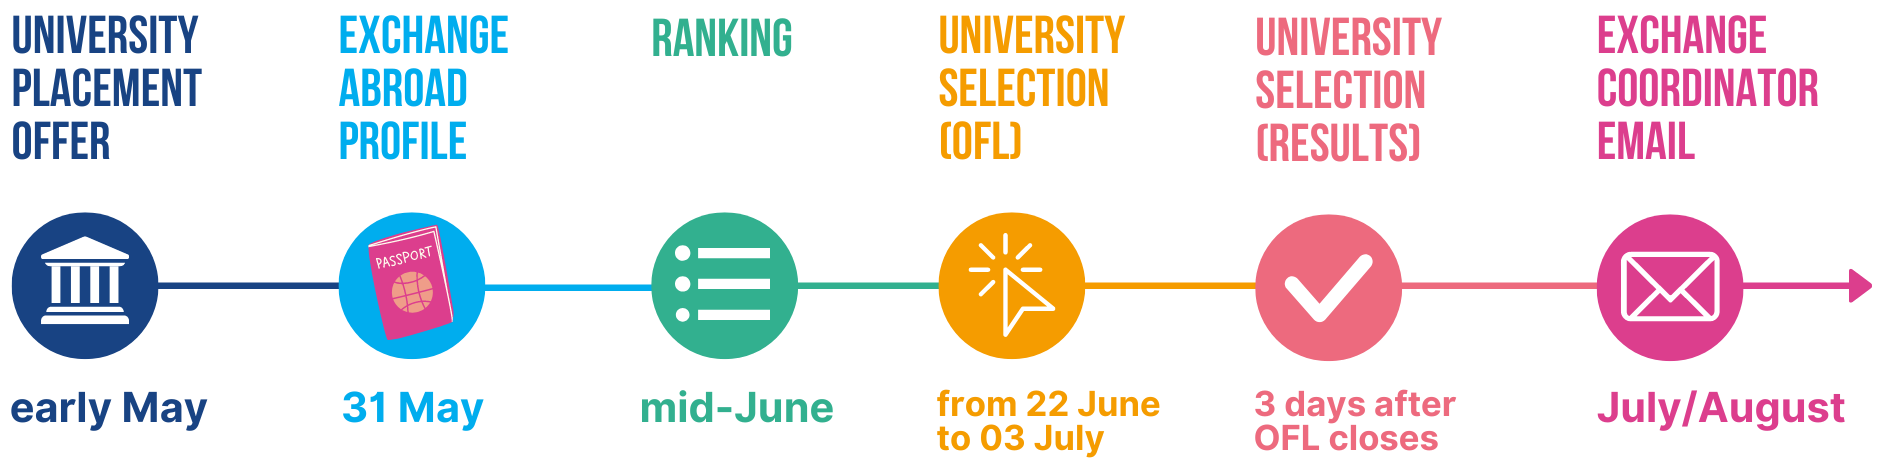 University_Selection_Timelines__4_.png